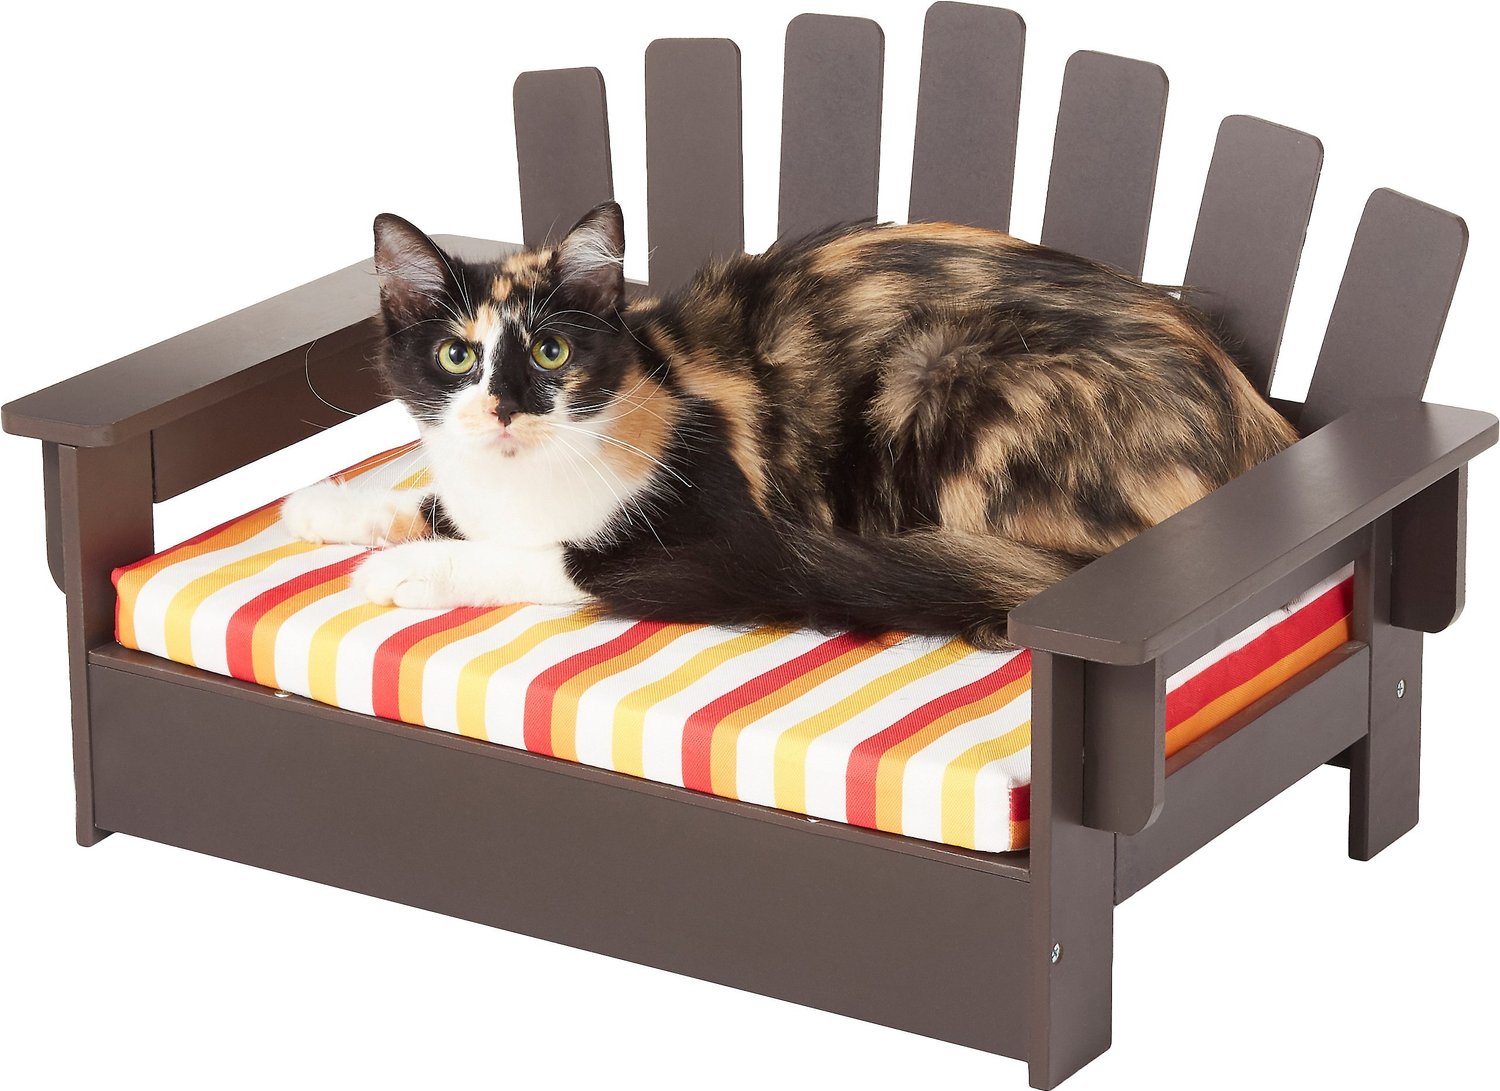 Etna Adirondack Dog & Cat Chair With Cushion, Brown - Chewy.com